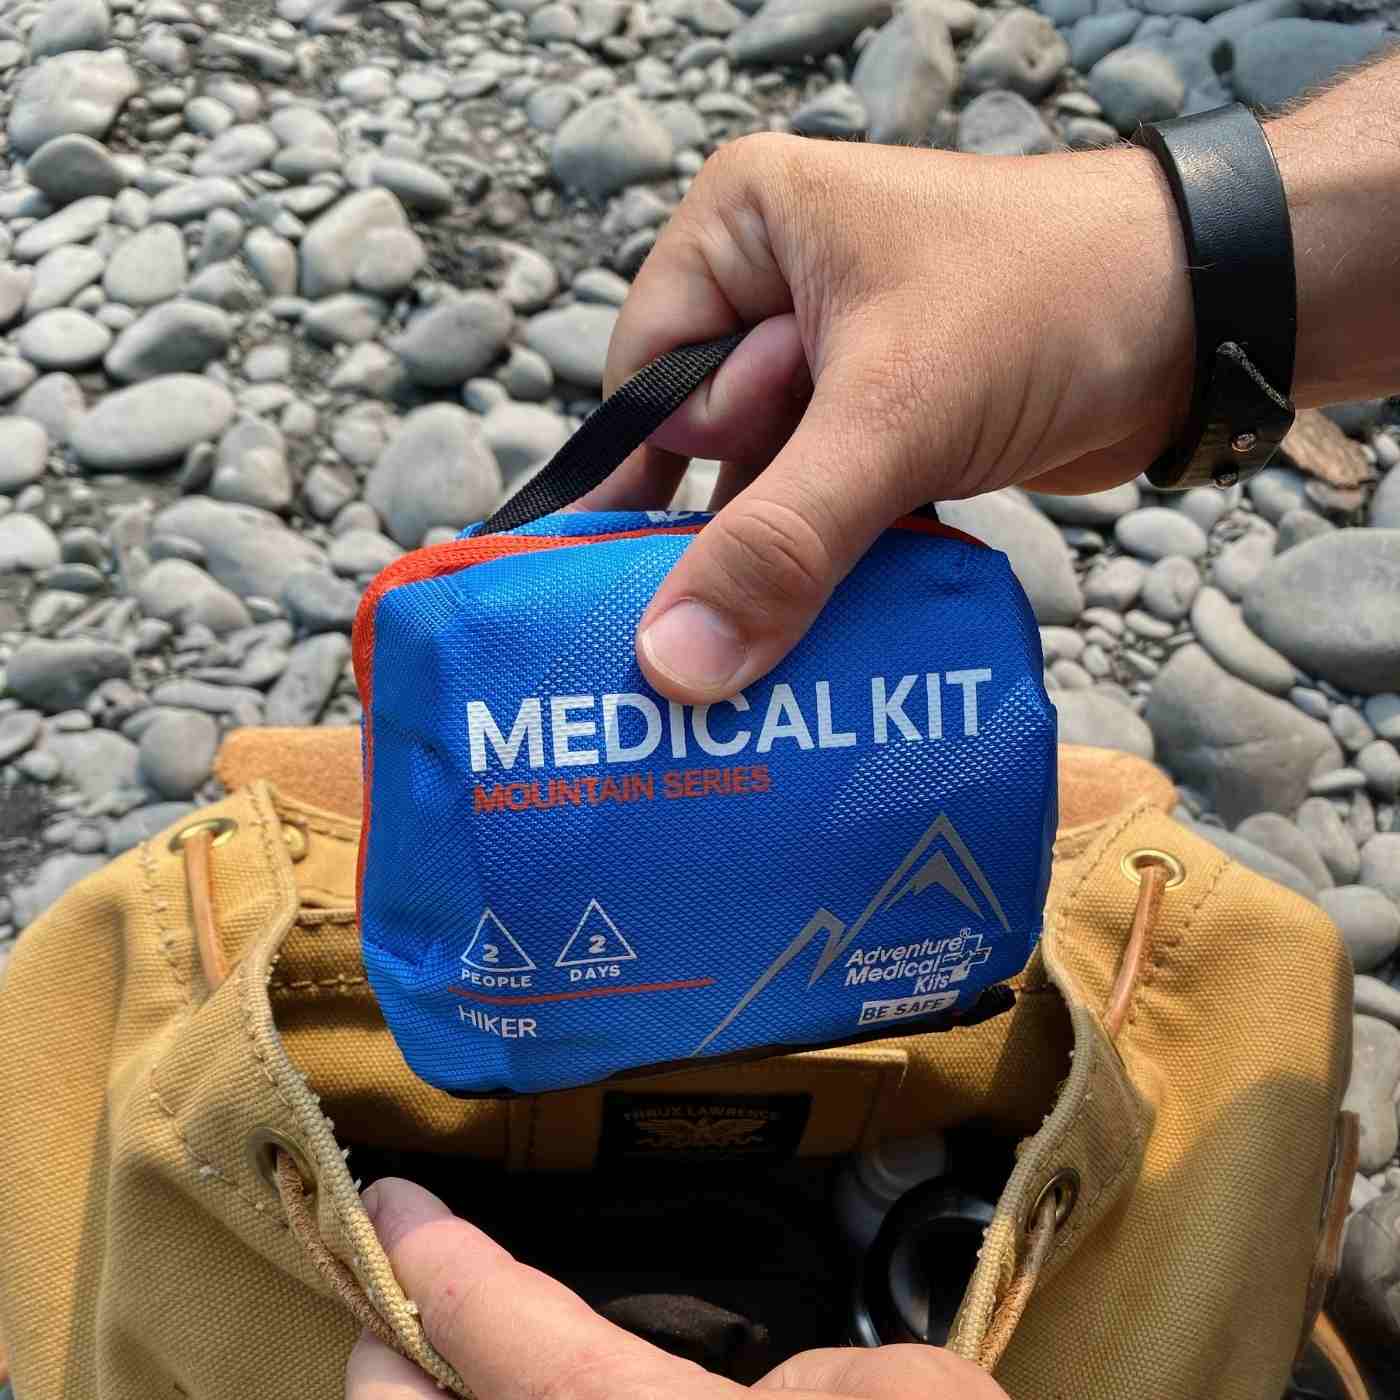 Mountain Series Medical Kit - Hiker pulling kit out of brown bag on rocky ground